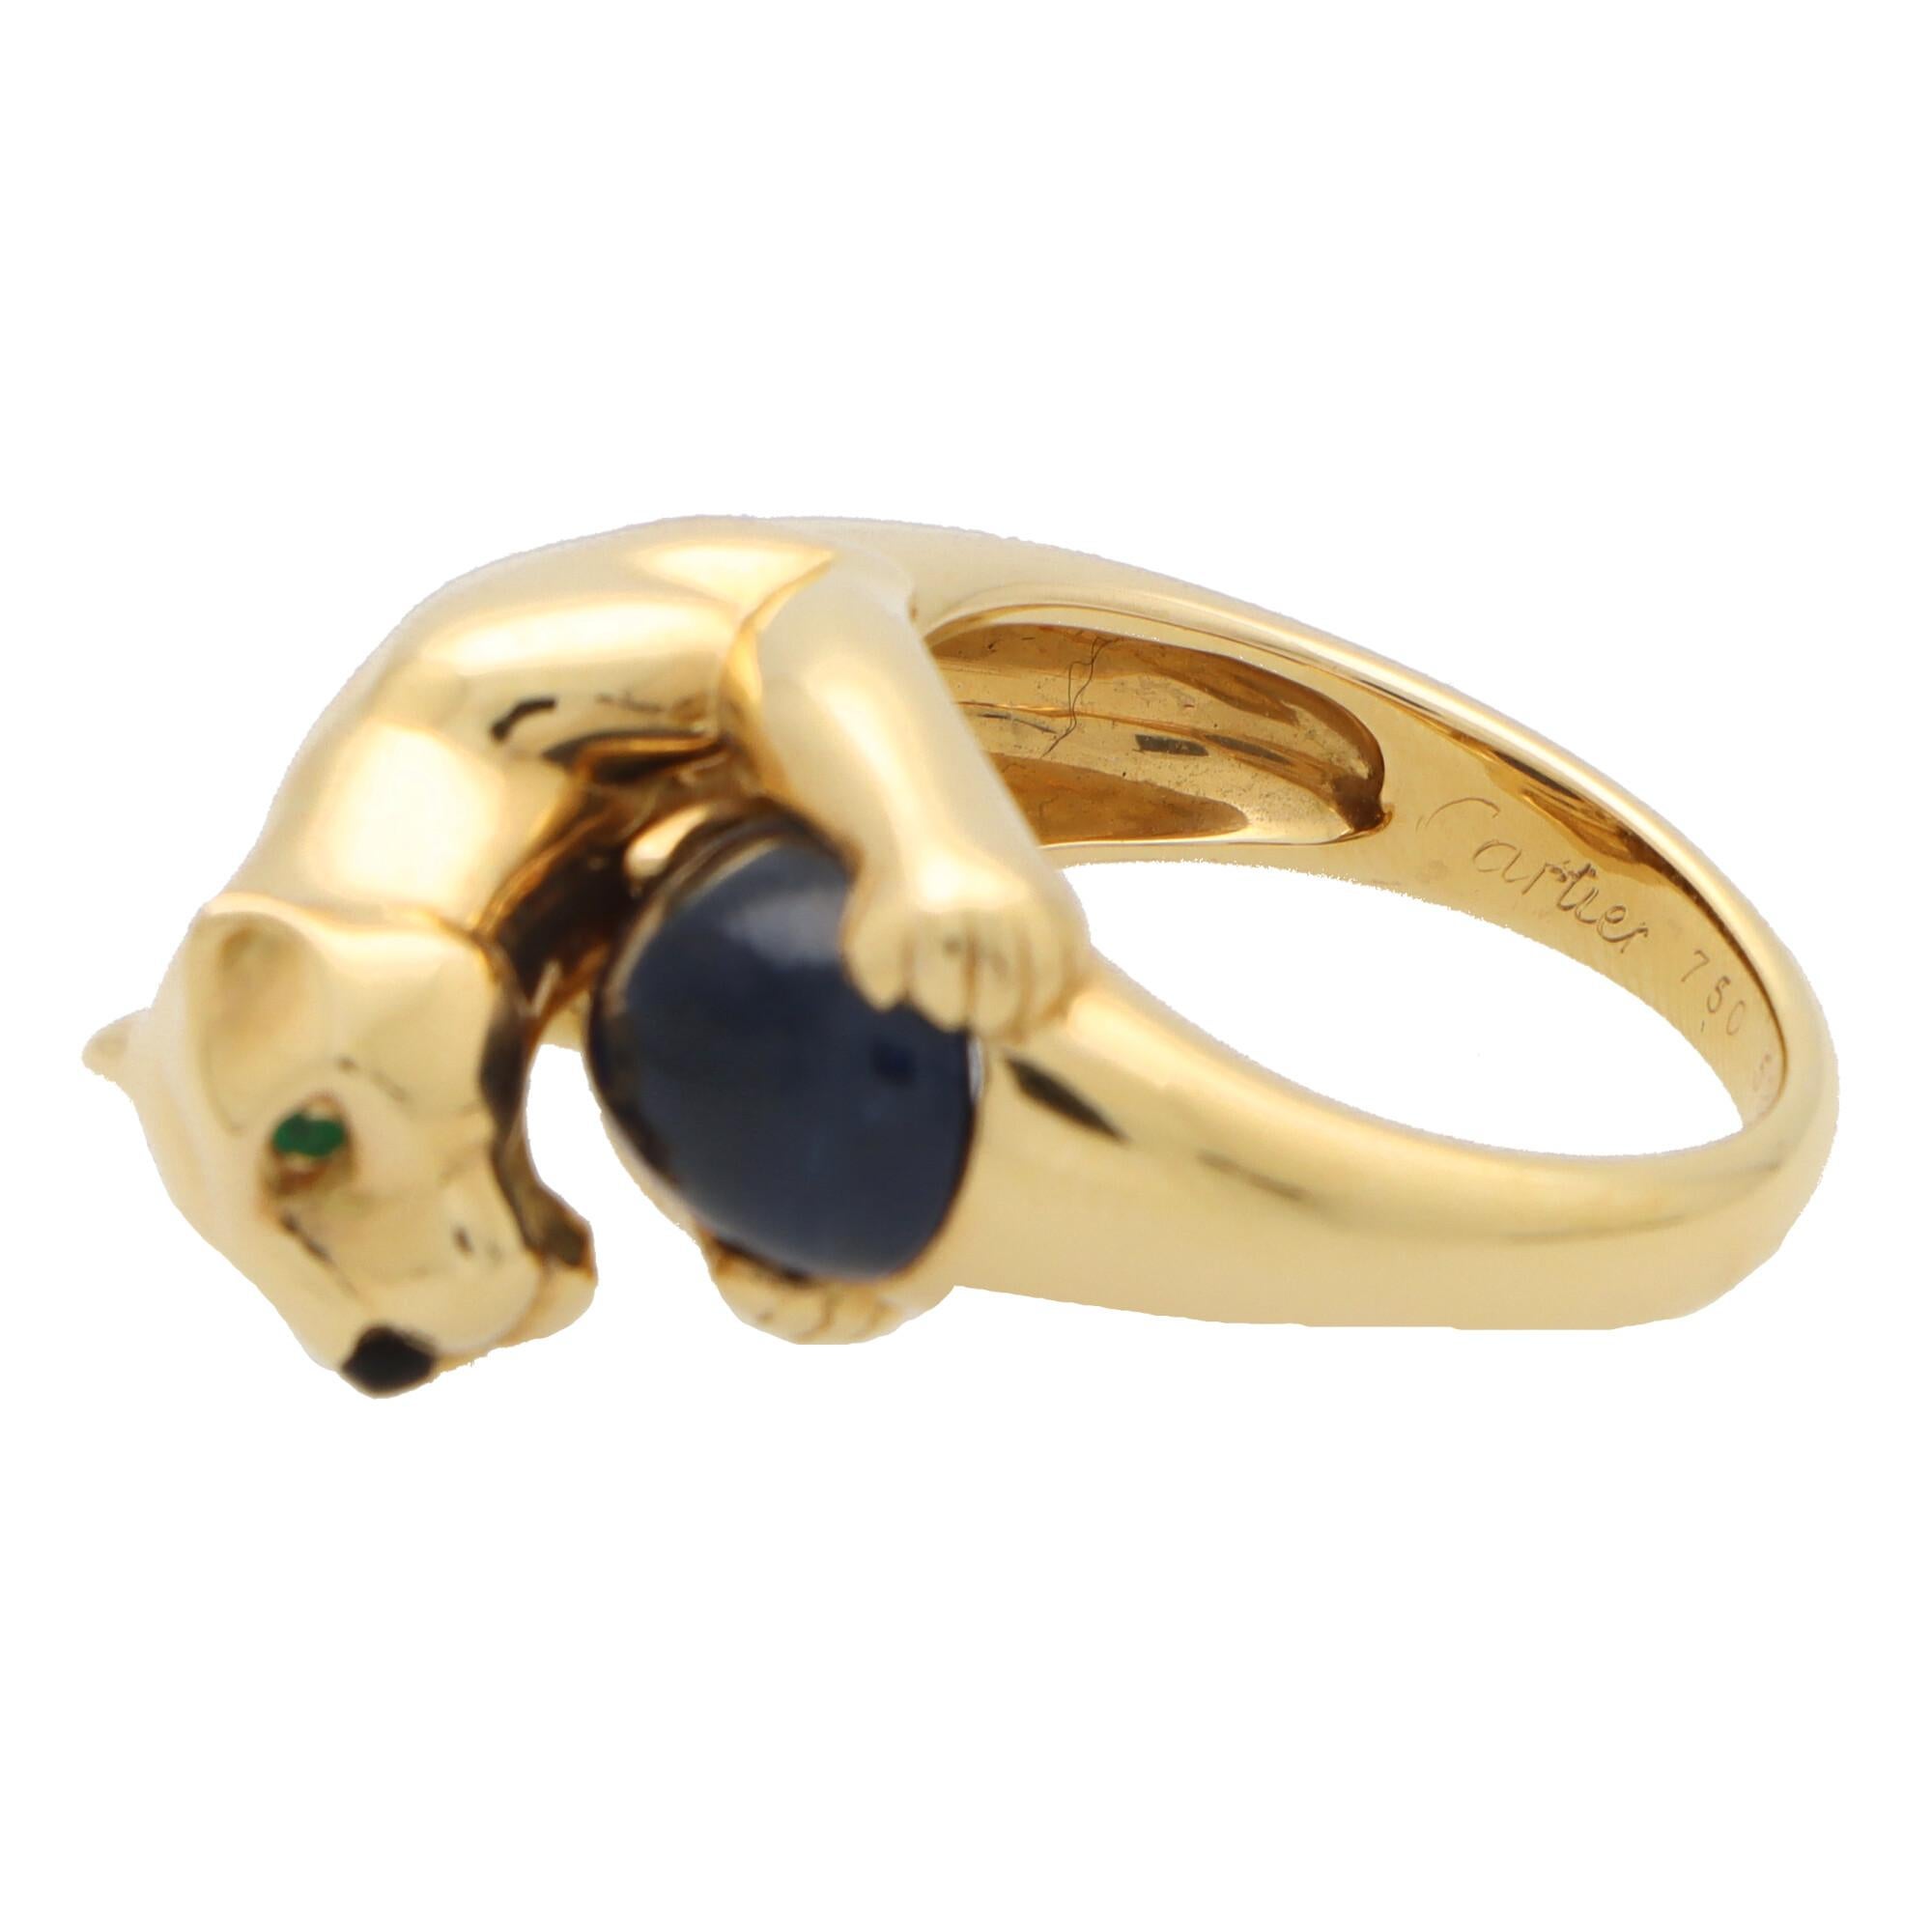 Cabochon Vintage Panthère De Cartier Sapphire and Emerald Panther Ring Set in 18k Gold